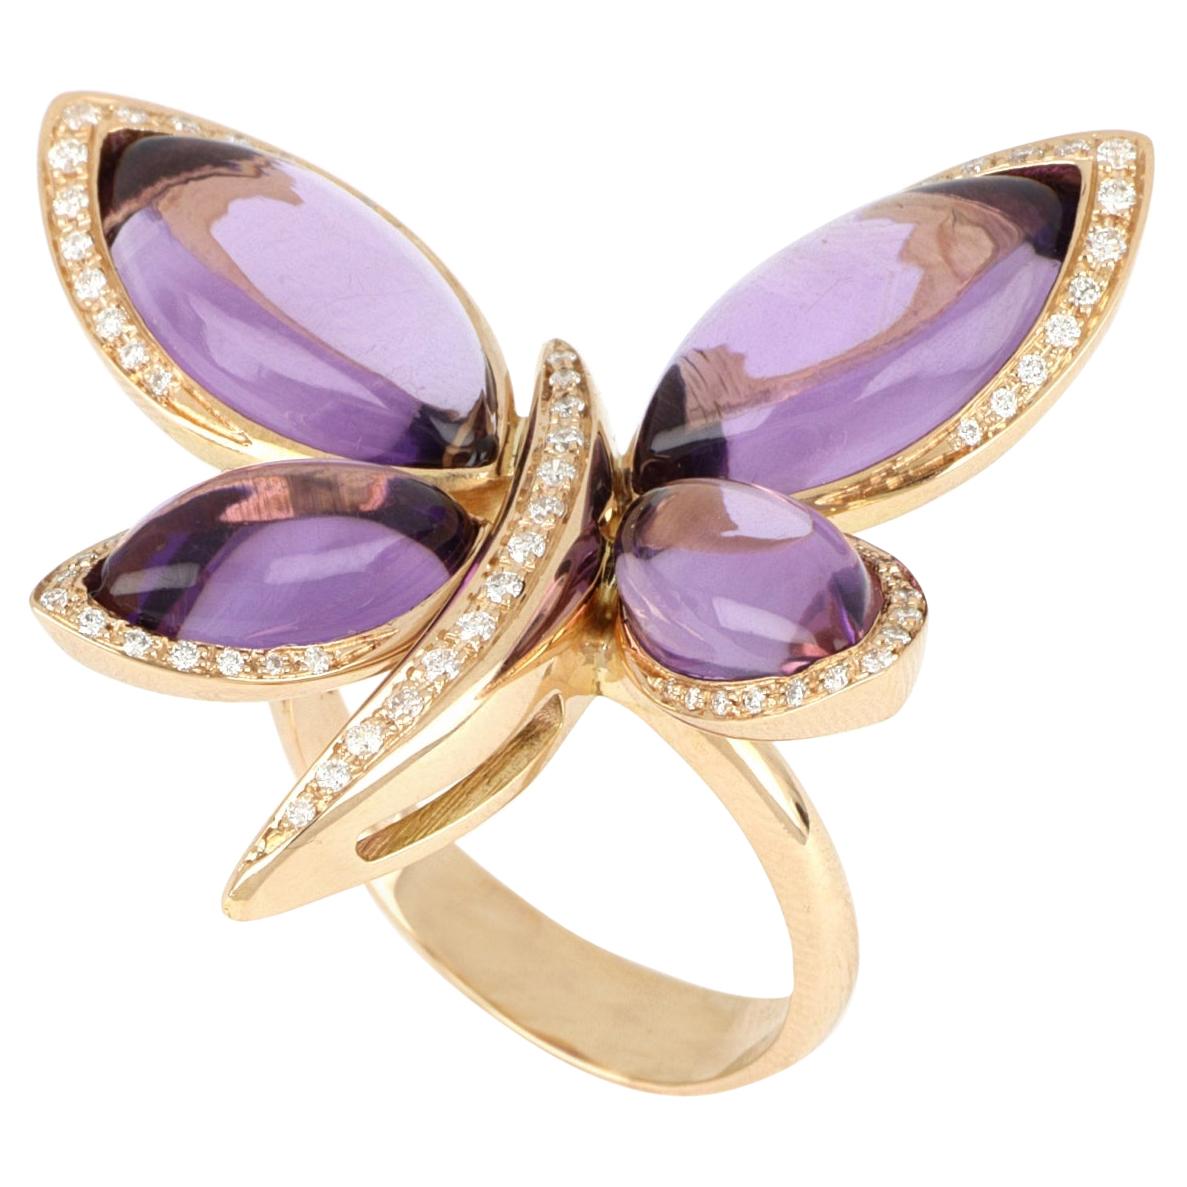 18kt Rose Gold Les Papillons Ring with Purple Amathyst and Diamonds